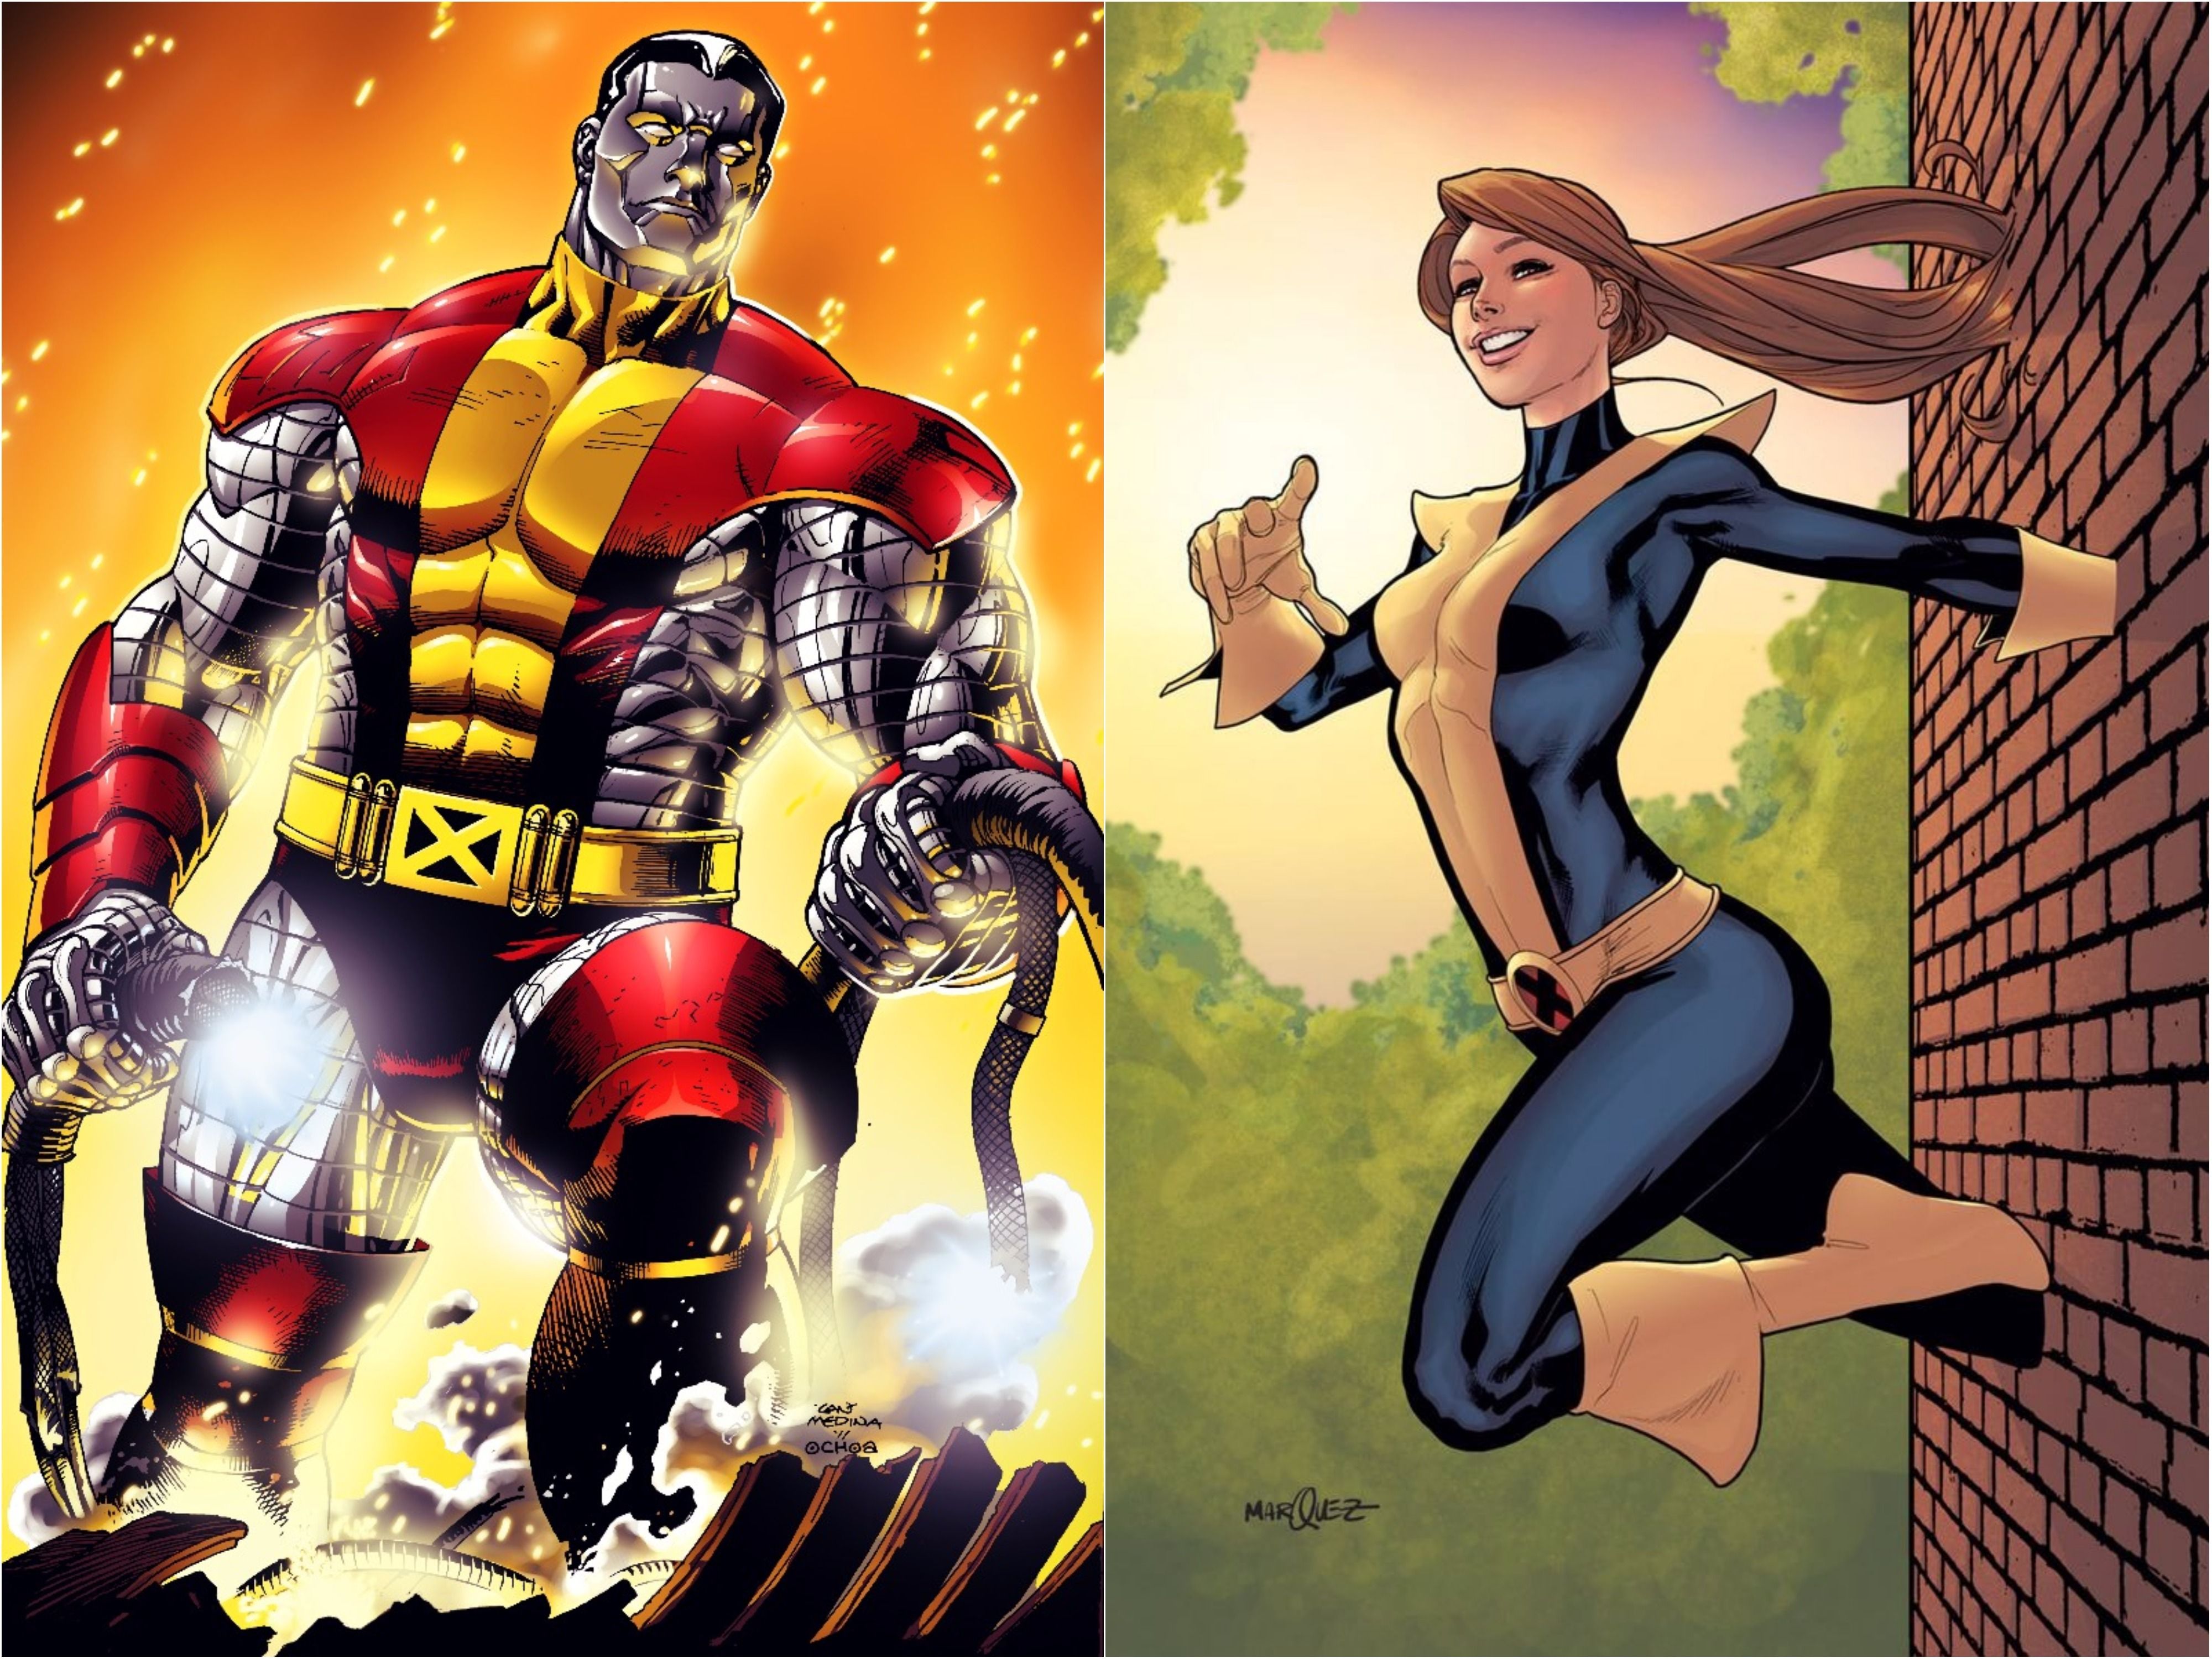 Colossus and Kitty Pryde